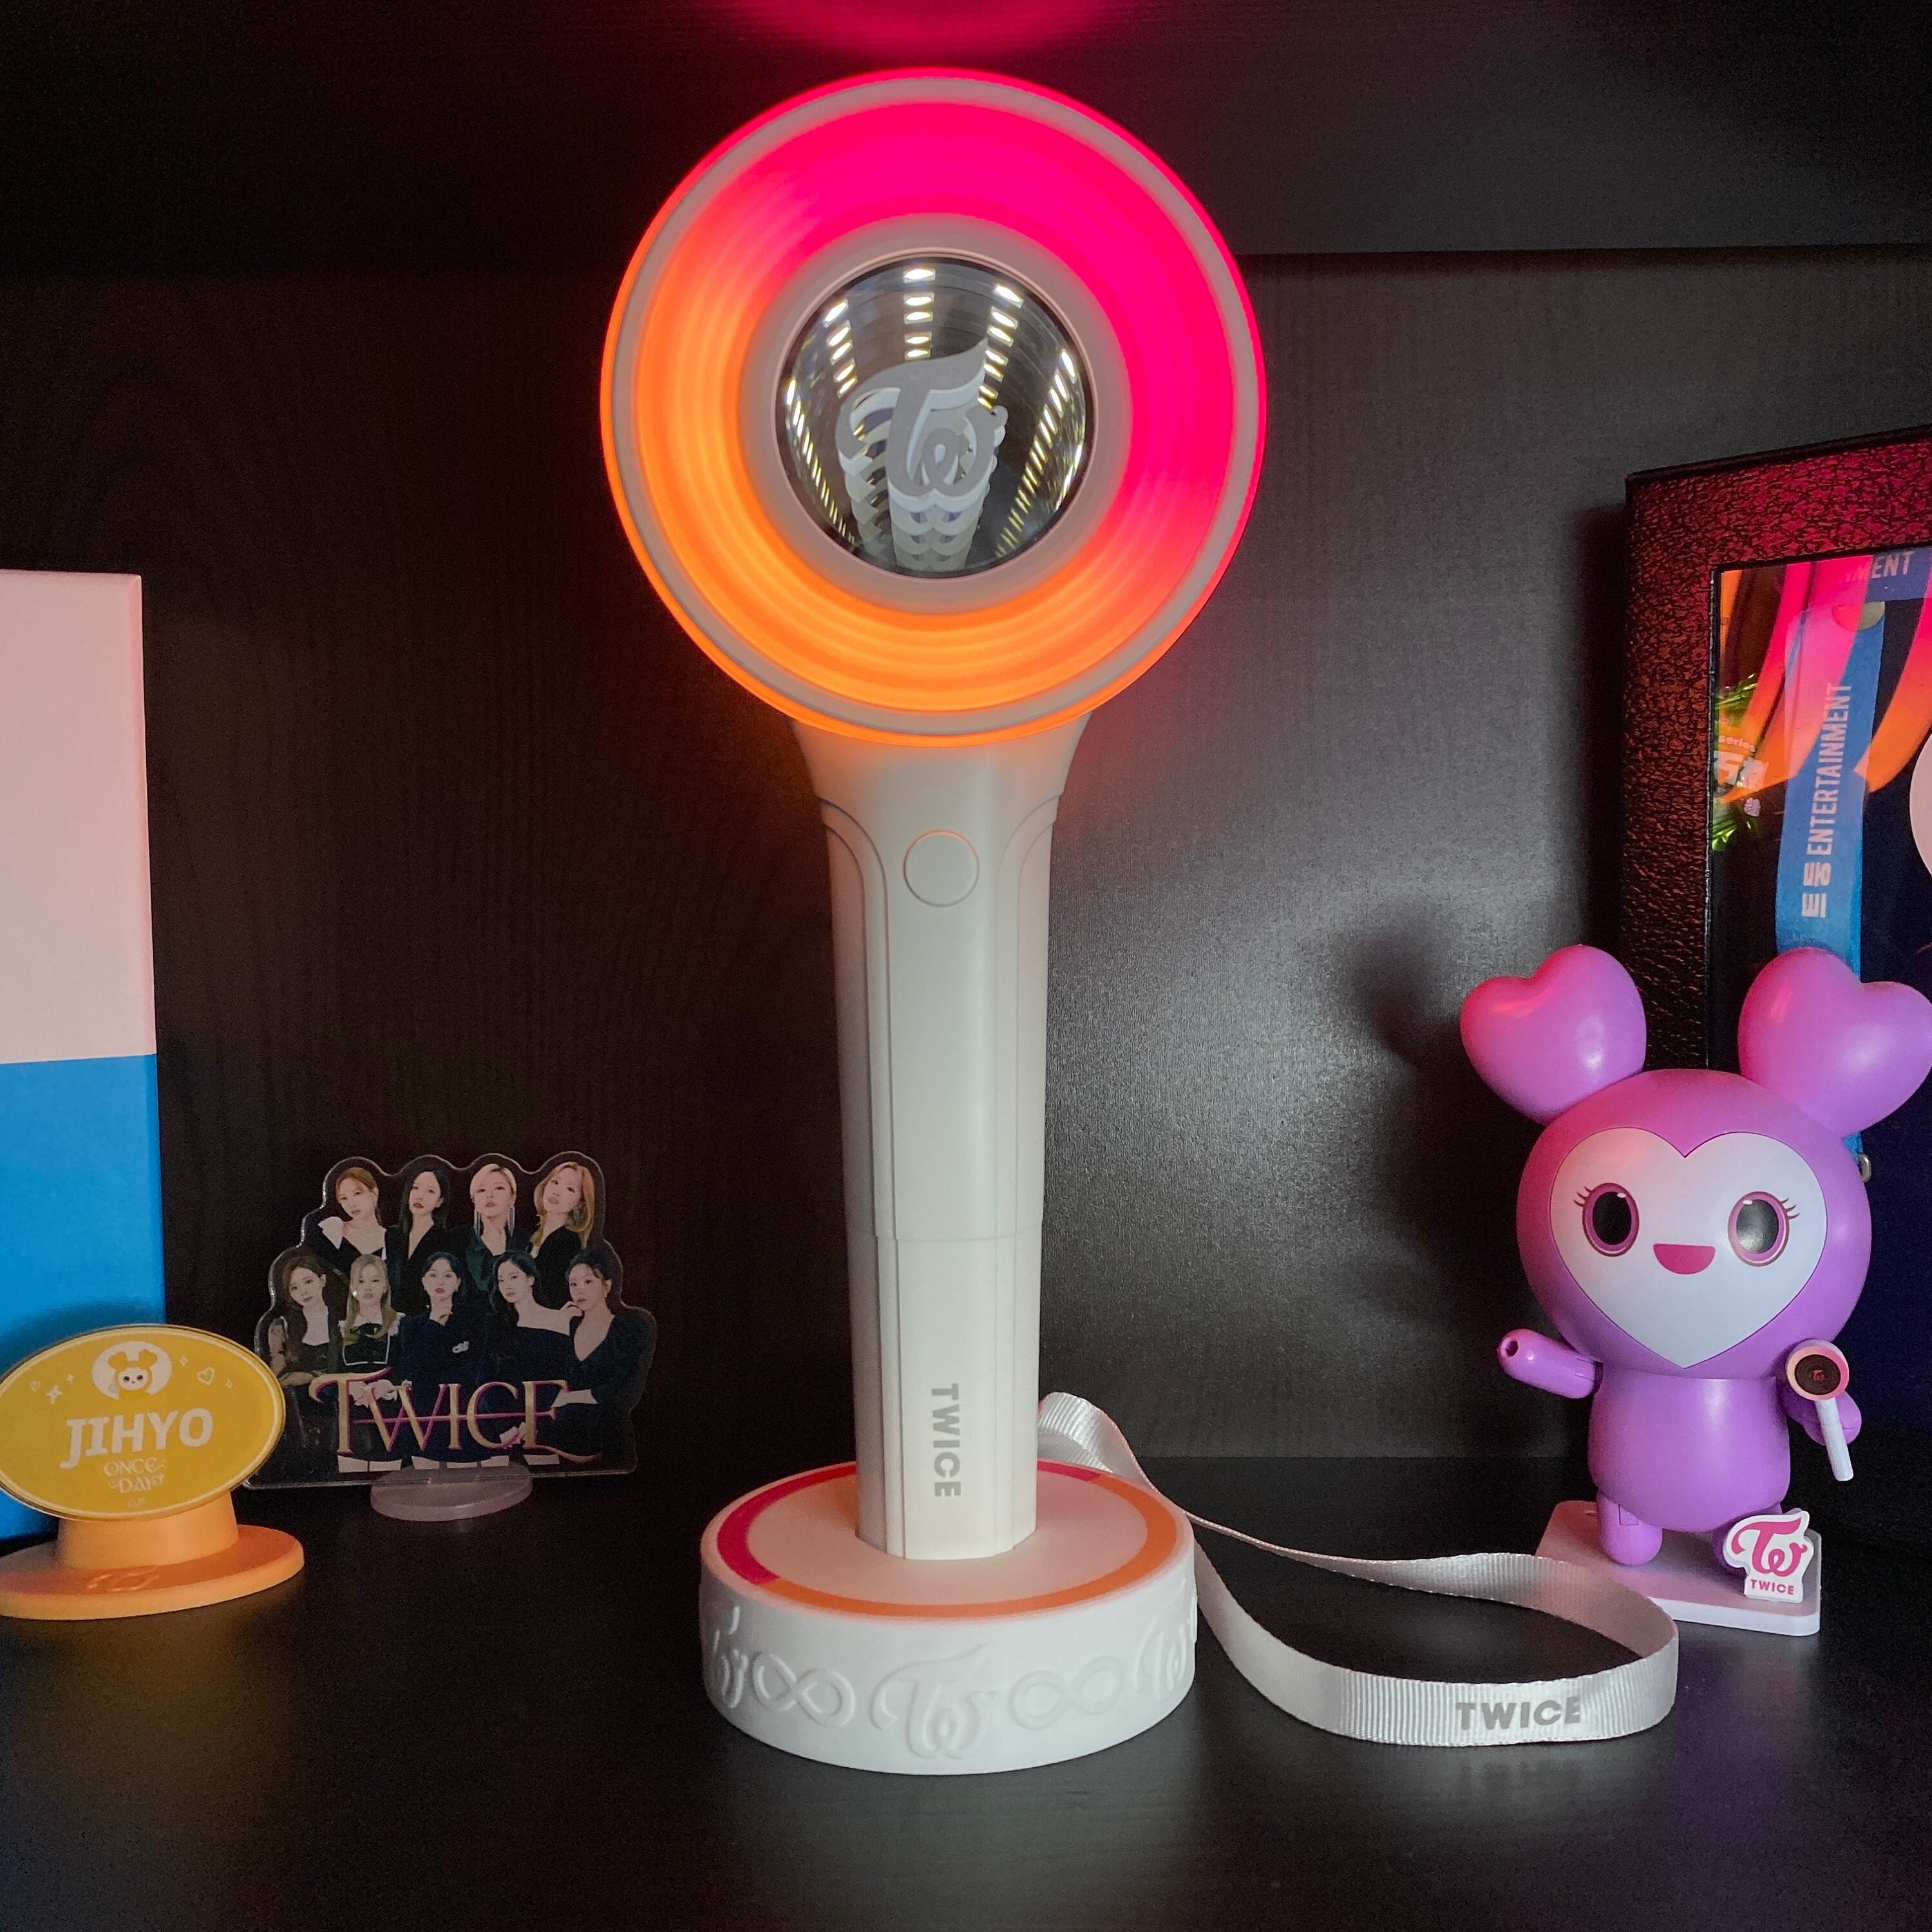 Twice Lightstick Cover - Etsy